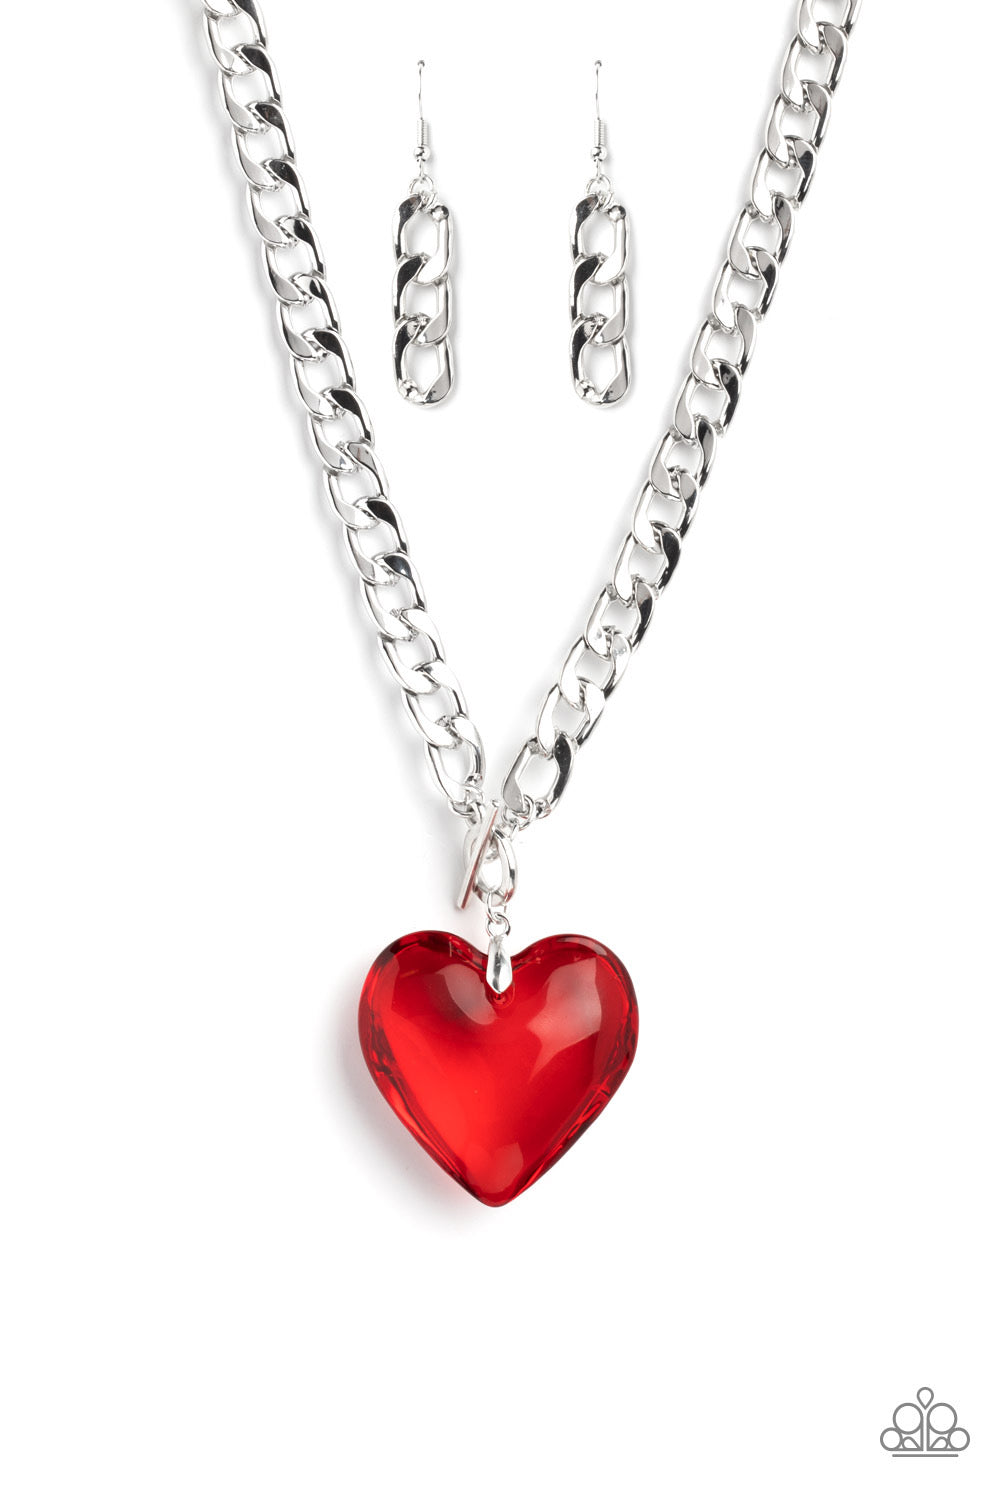 Paparazzi GLASSY-Hero - Red Heart Necklace- March 2023 Life of the Party Paparazzi jewelry image